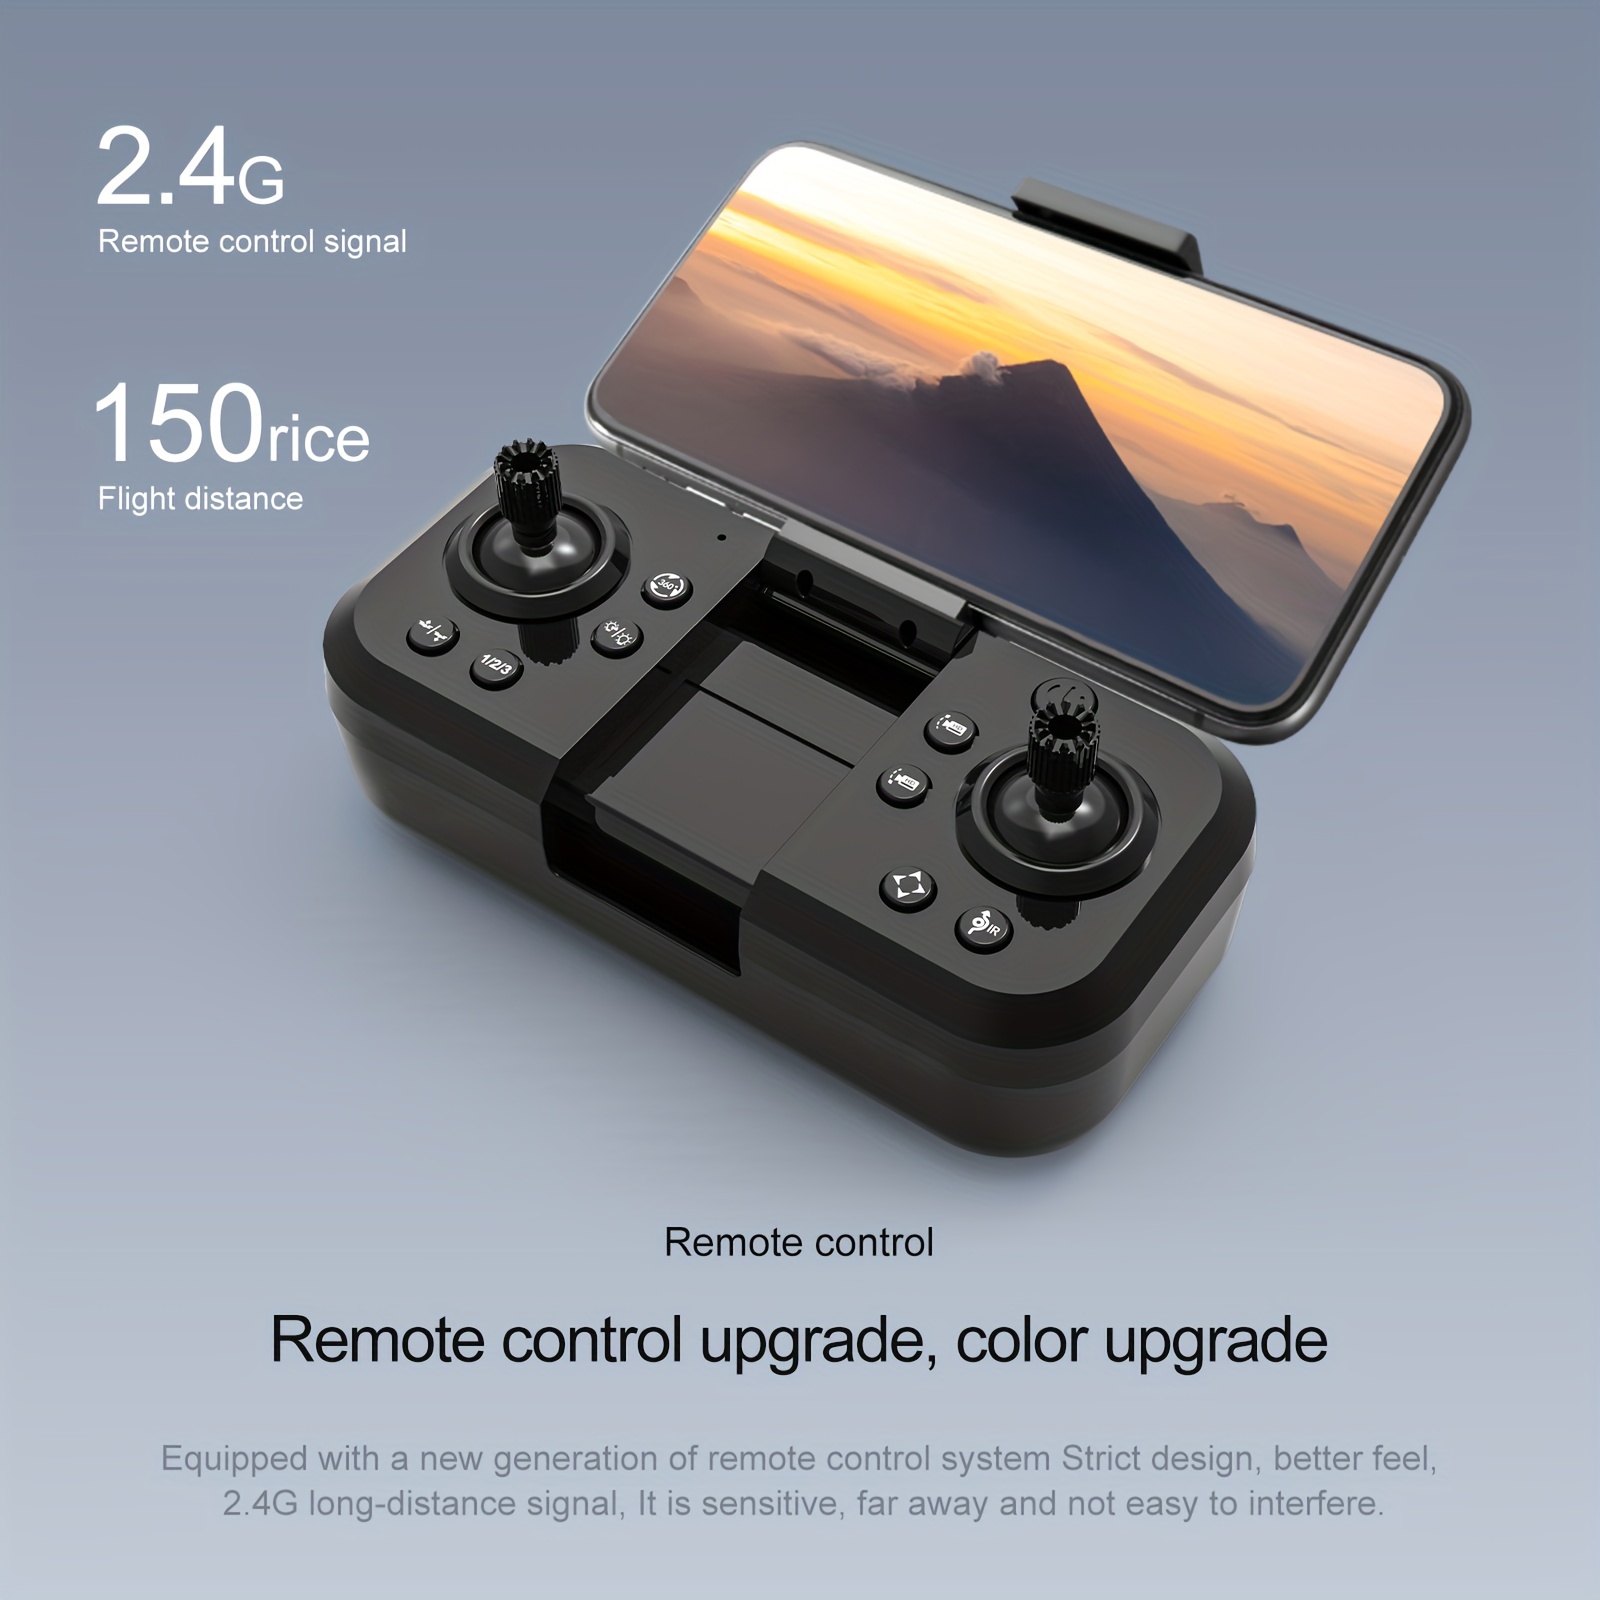 yt163 foldable drone remote control and app control easy to carry four sided sensor obstacle avoidance stable flight one key return high definition camera camera angle adjustable drone details 12